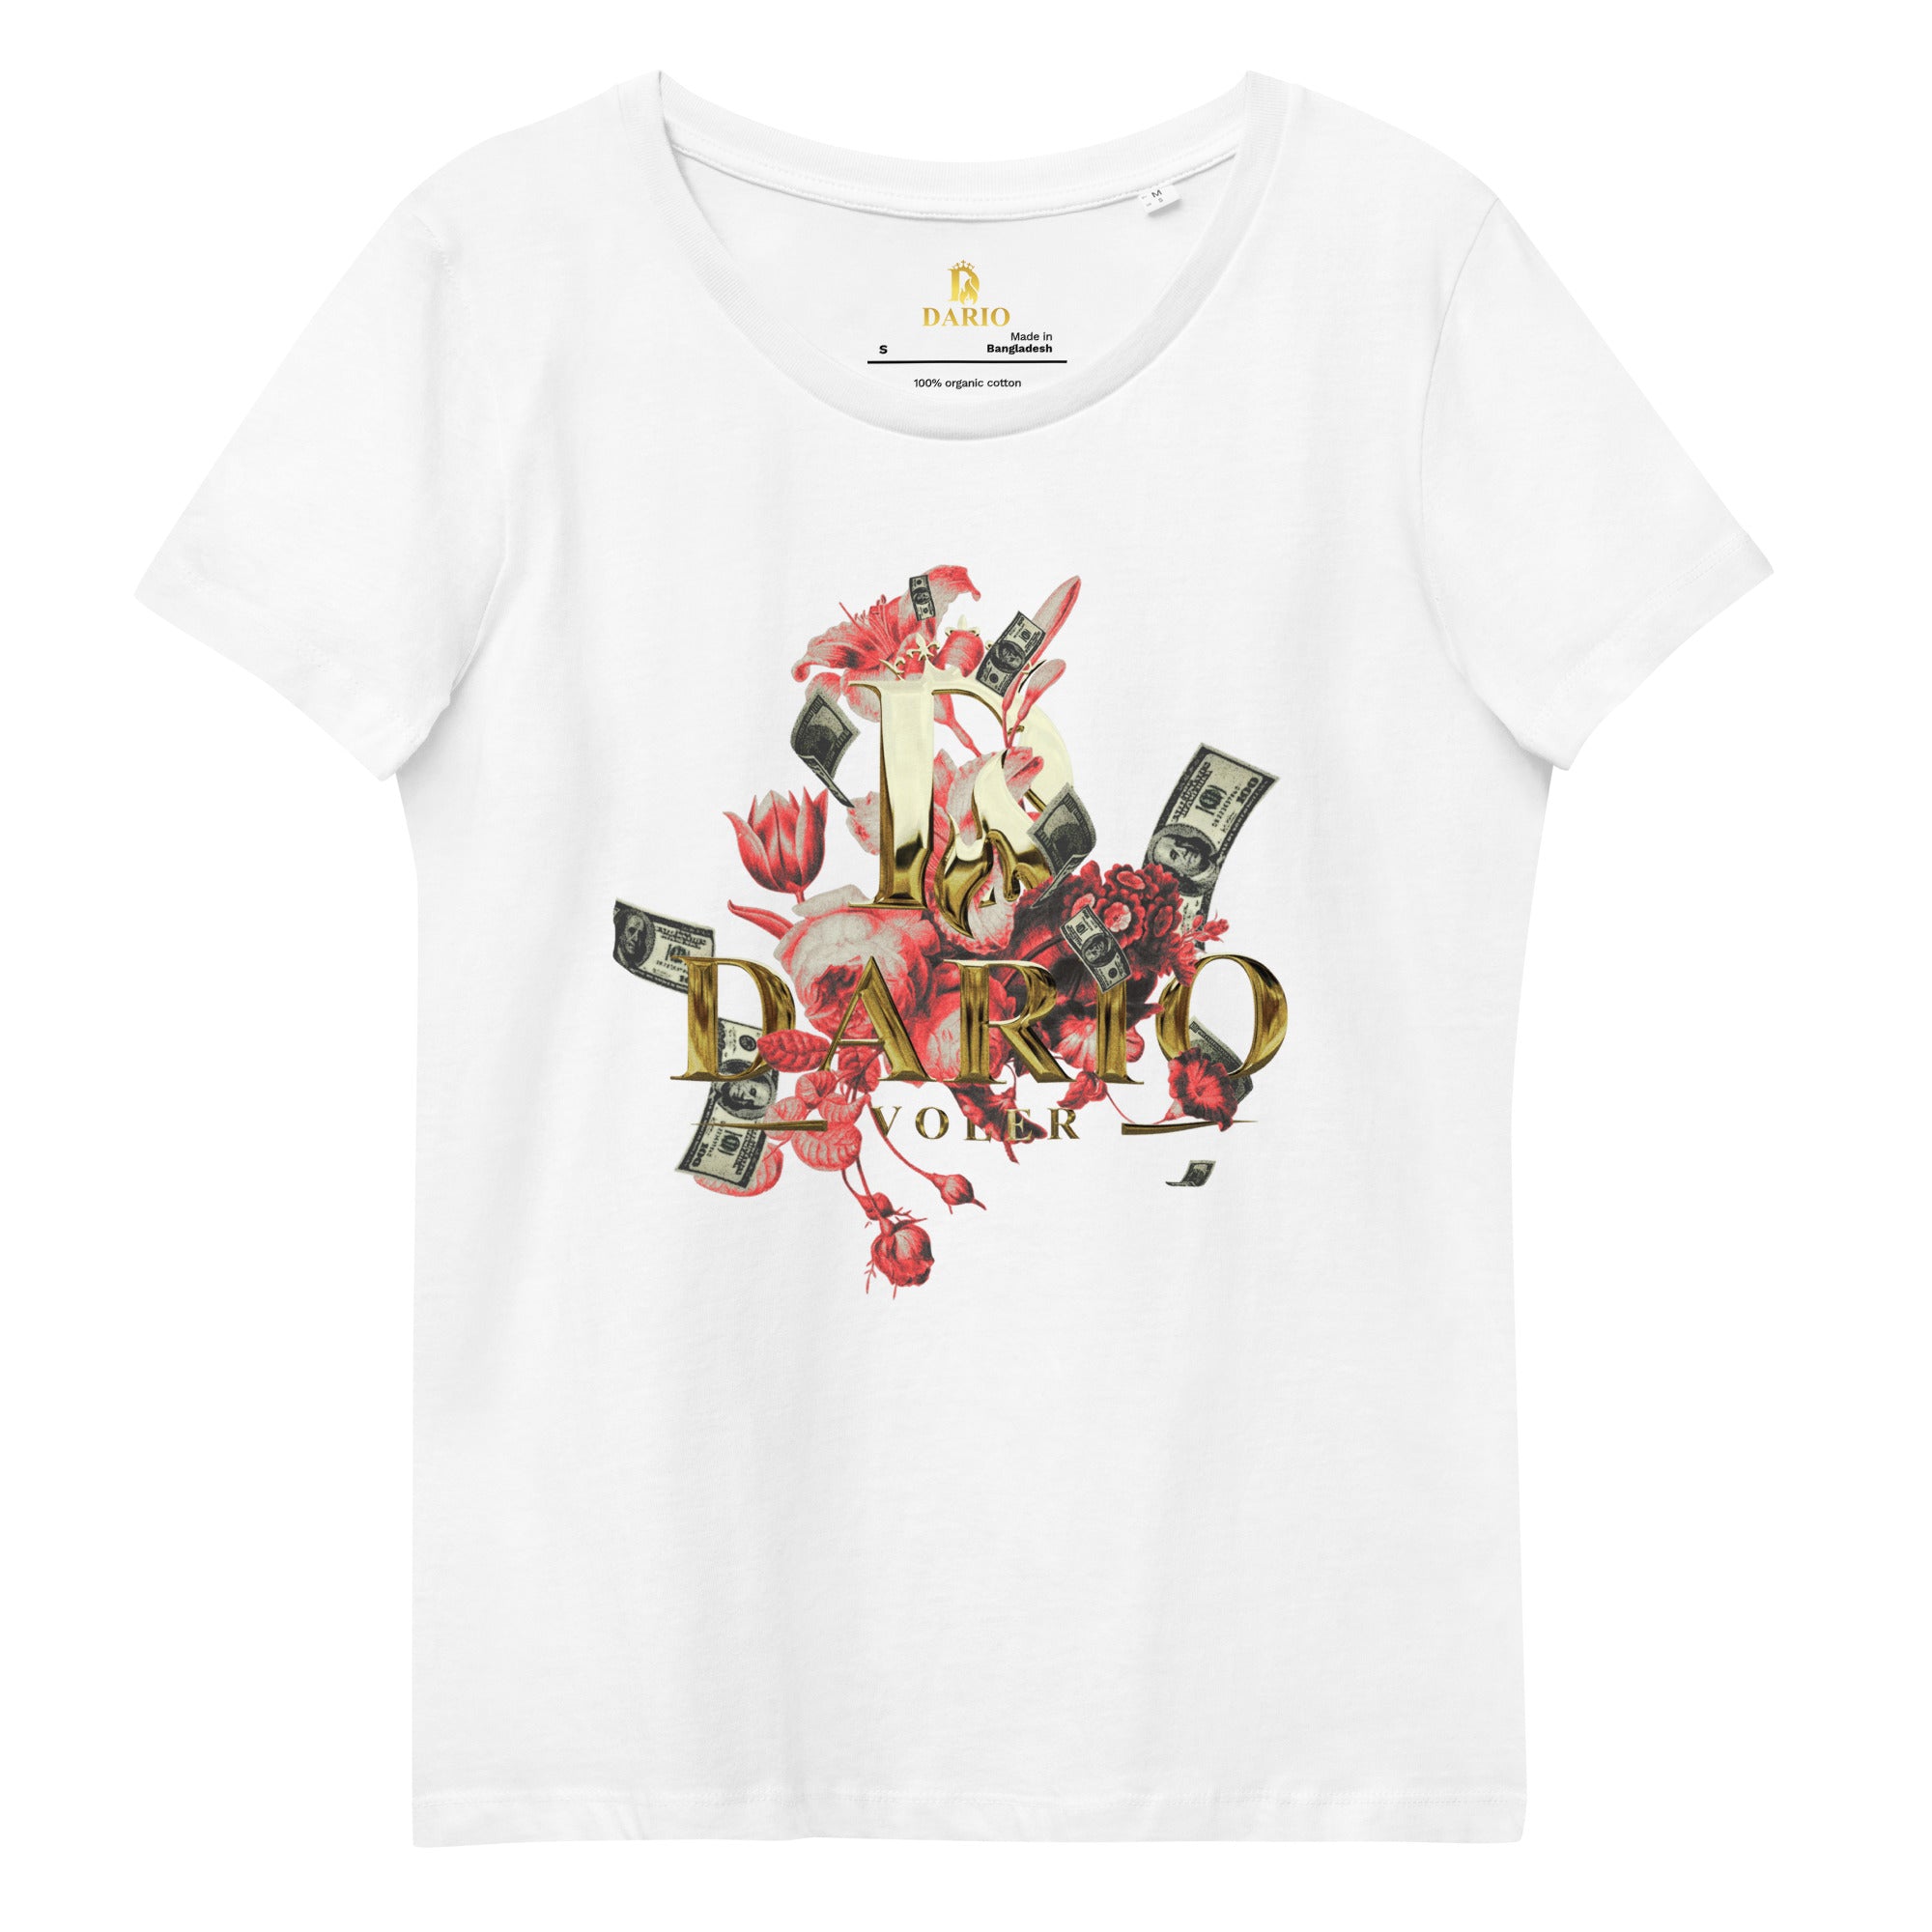 Women's Hustle Passion fitted tee